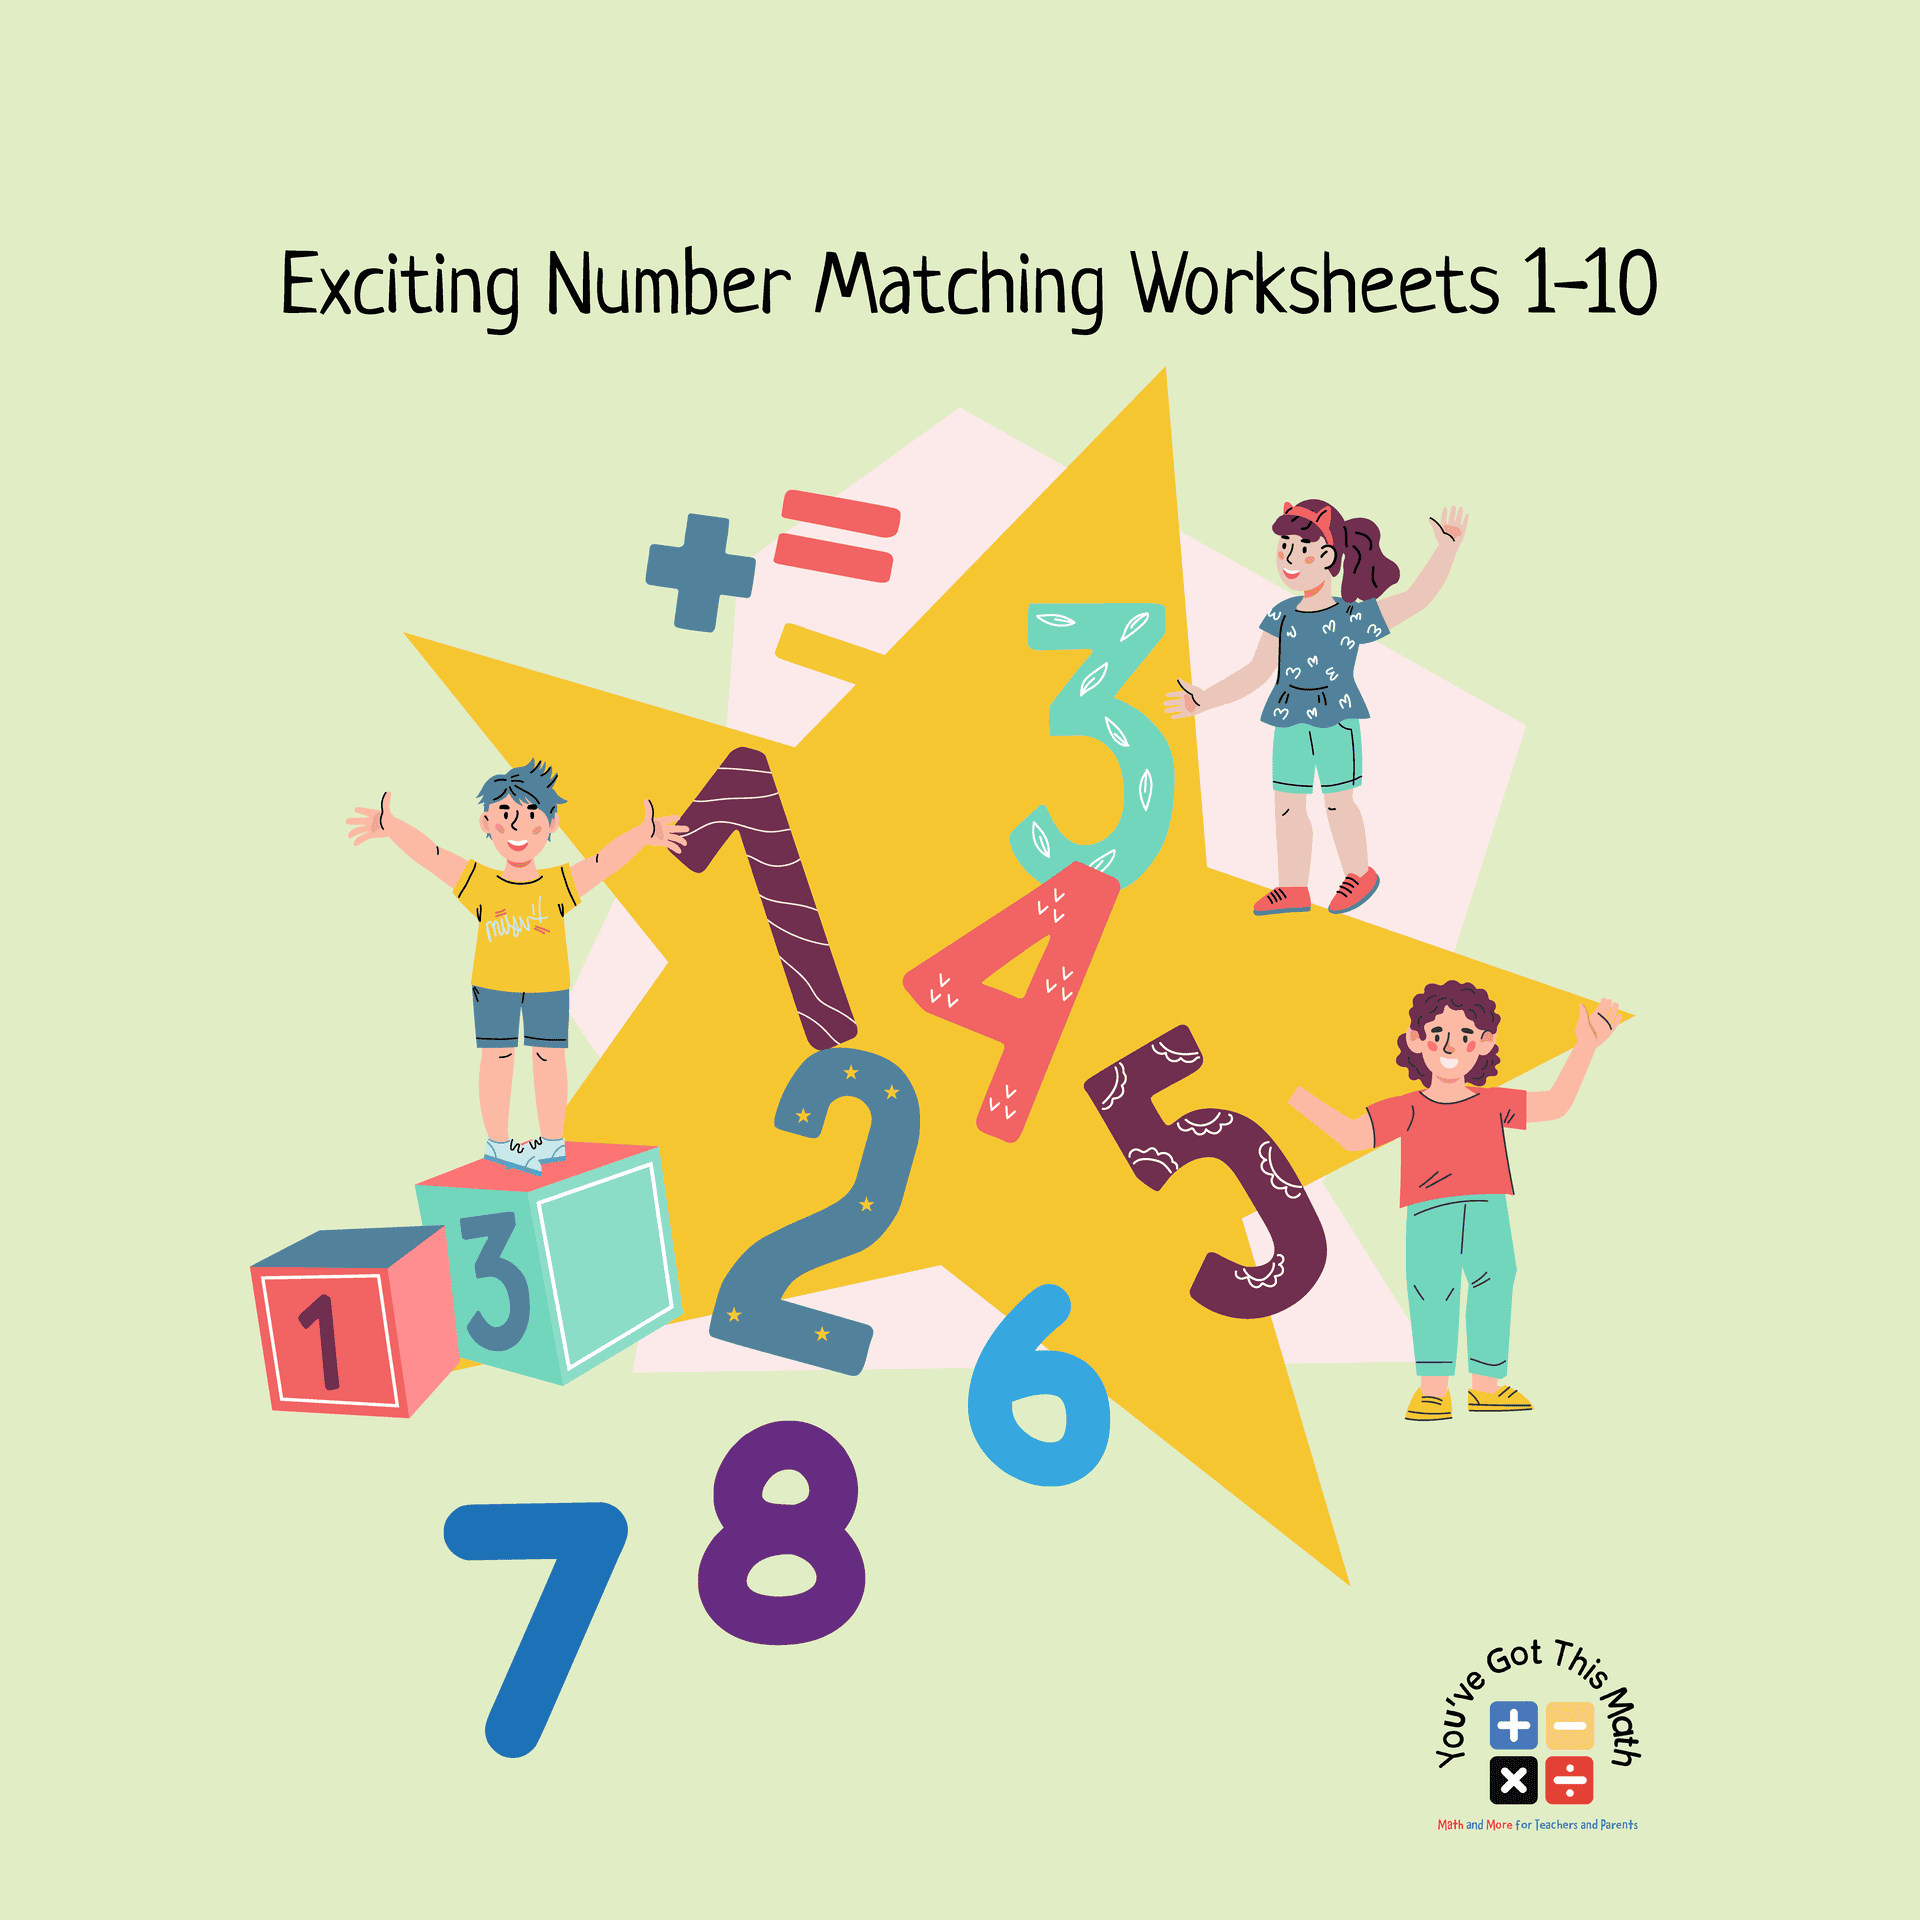 9 Exciting Number Matching Worksheets 1-10 | Free Printable